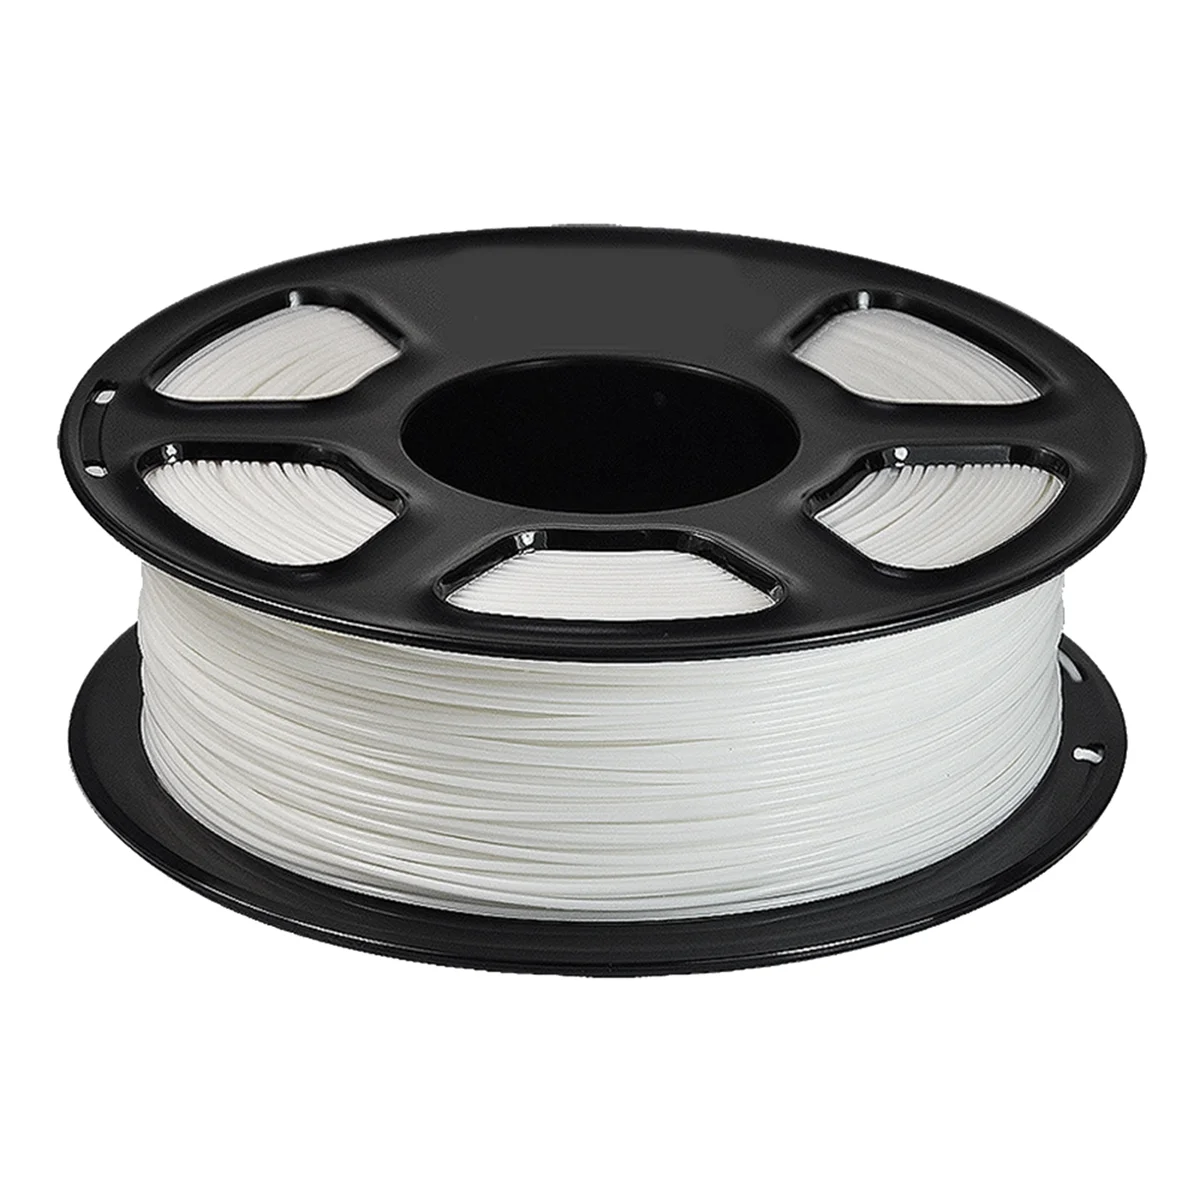 

3D Printer Filament PLA + , 3D Printing 1.75mm PLA Plus, Upgraded Neatly Wound 1KG Spool for Most 3D Printer White